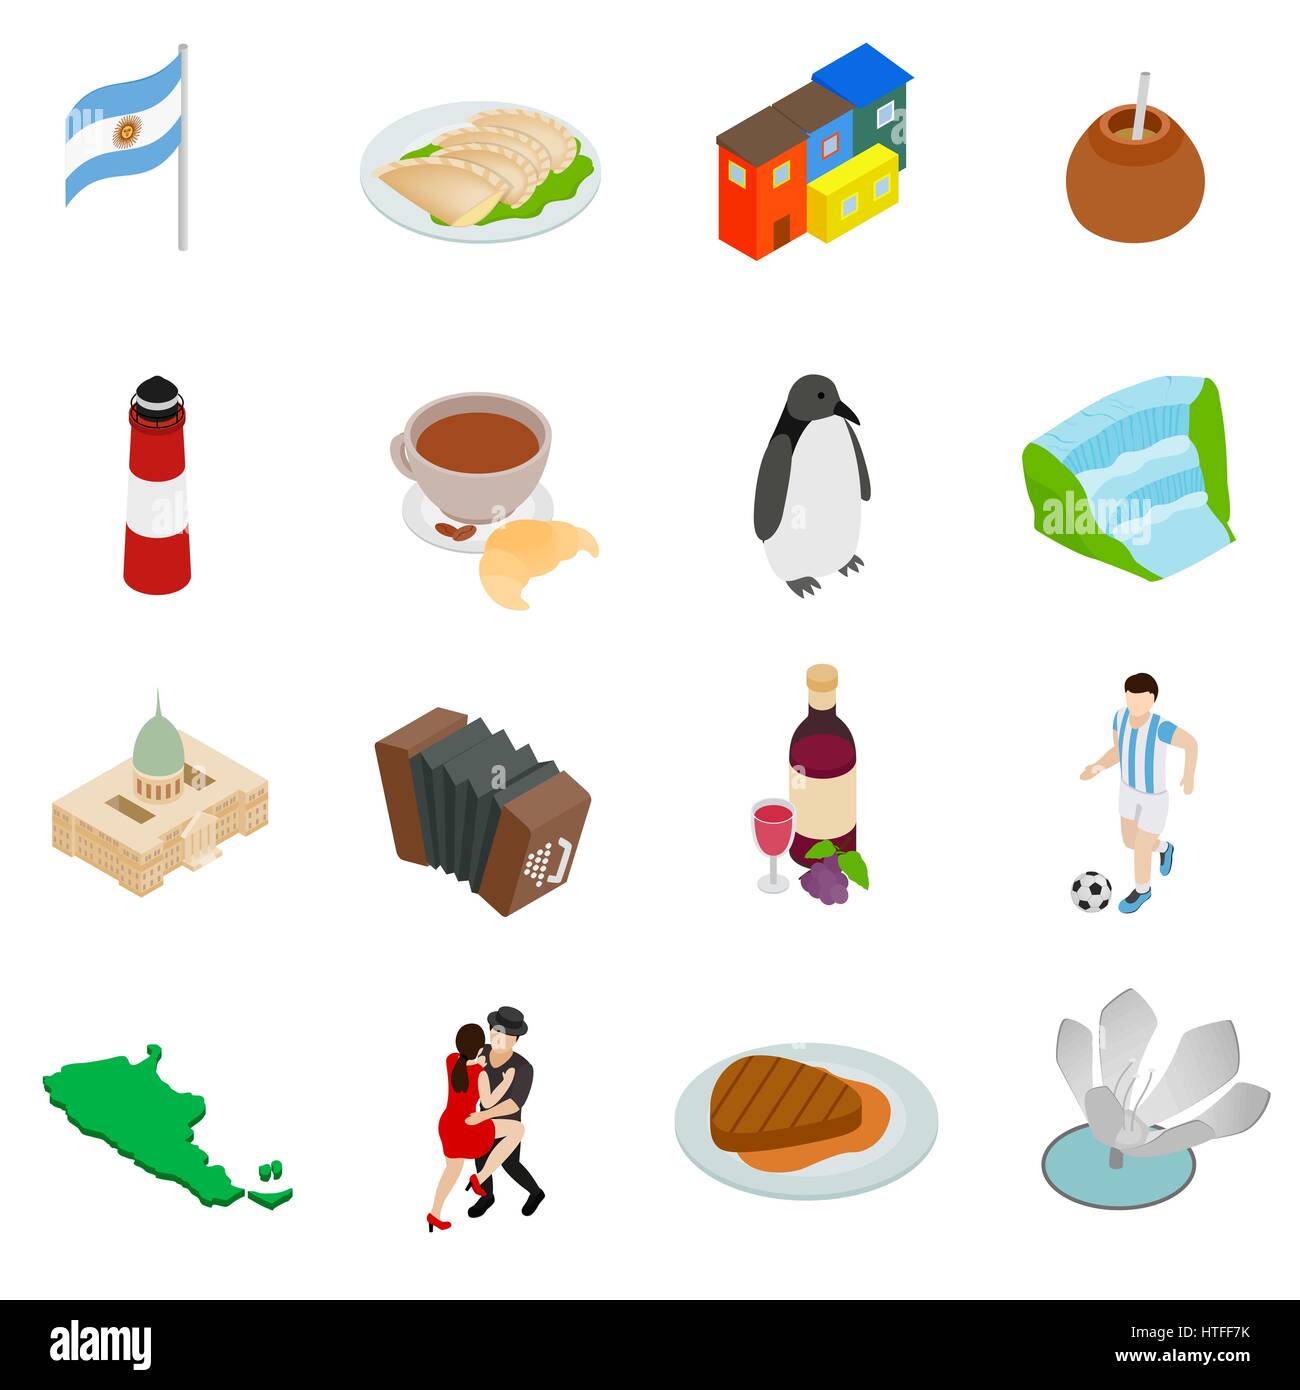 Argentina set icons Stock Vector